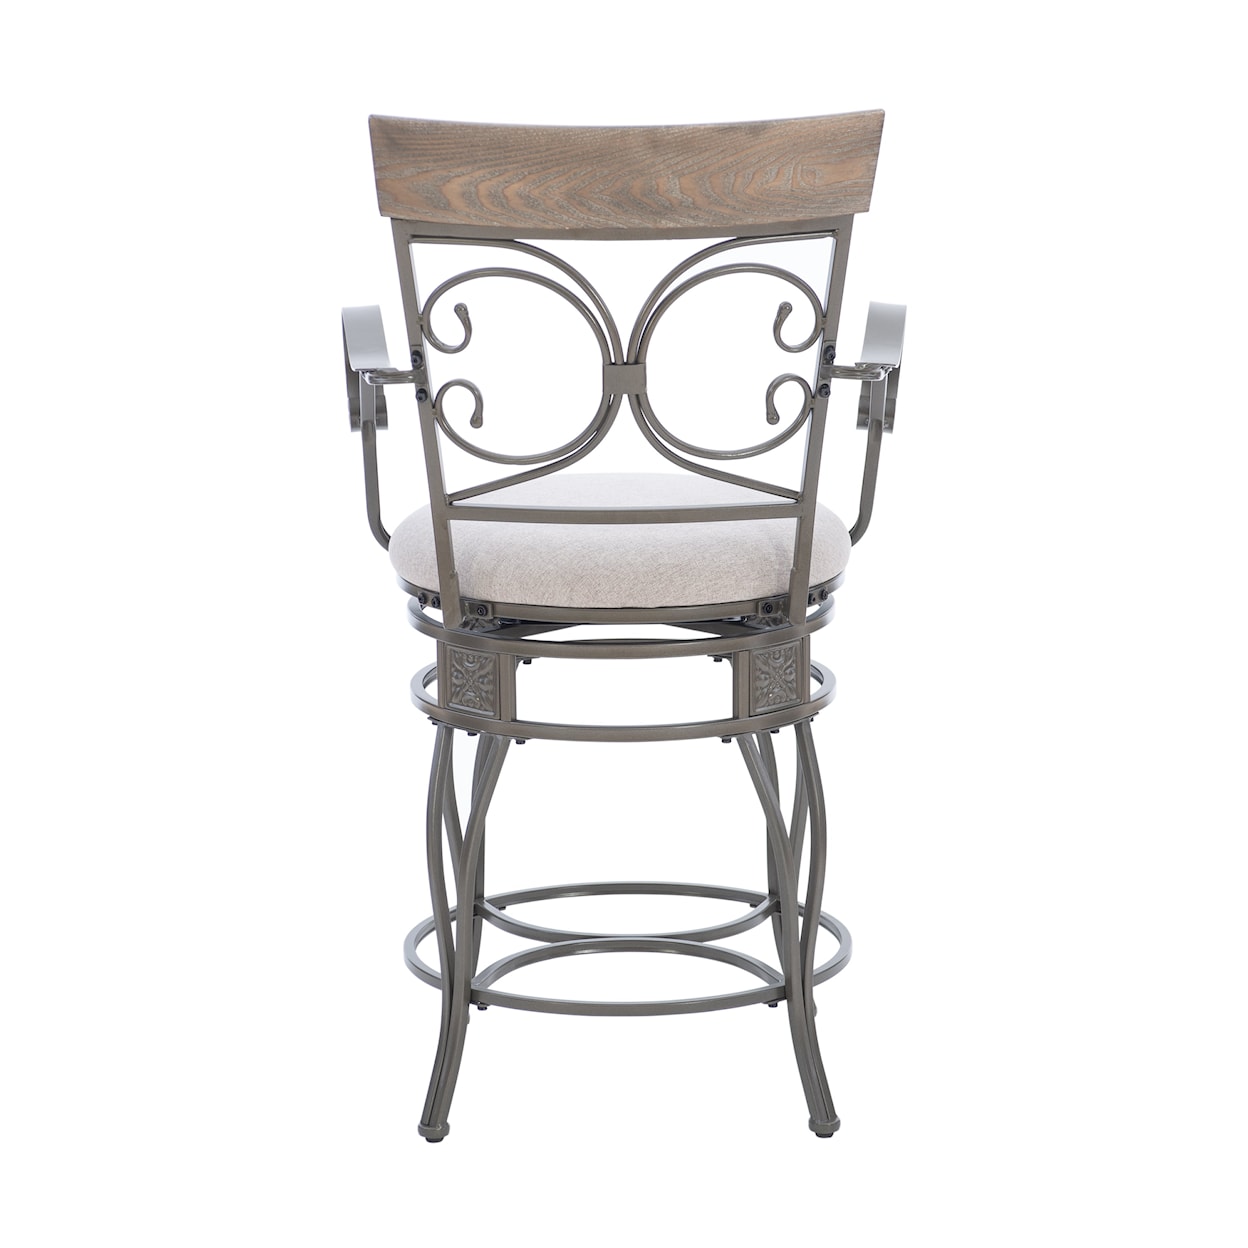 Powell Beeson Upholstered Counter Stool with Arms